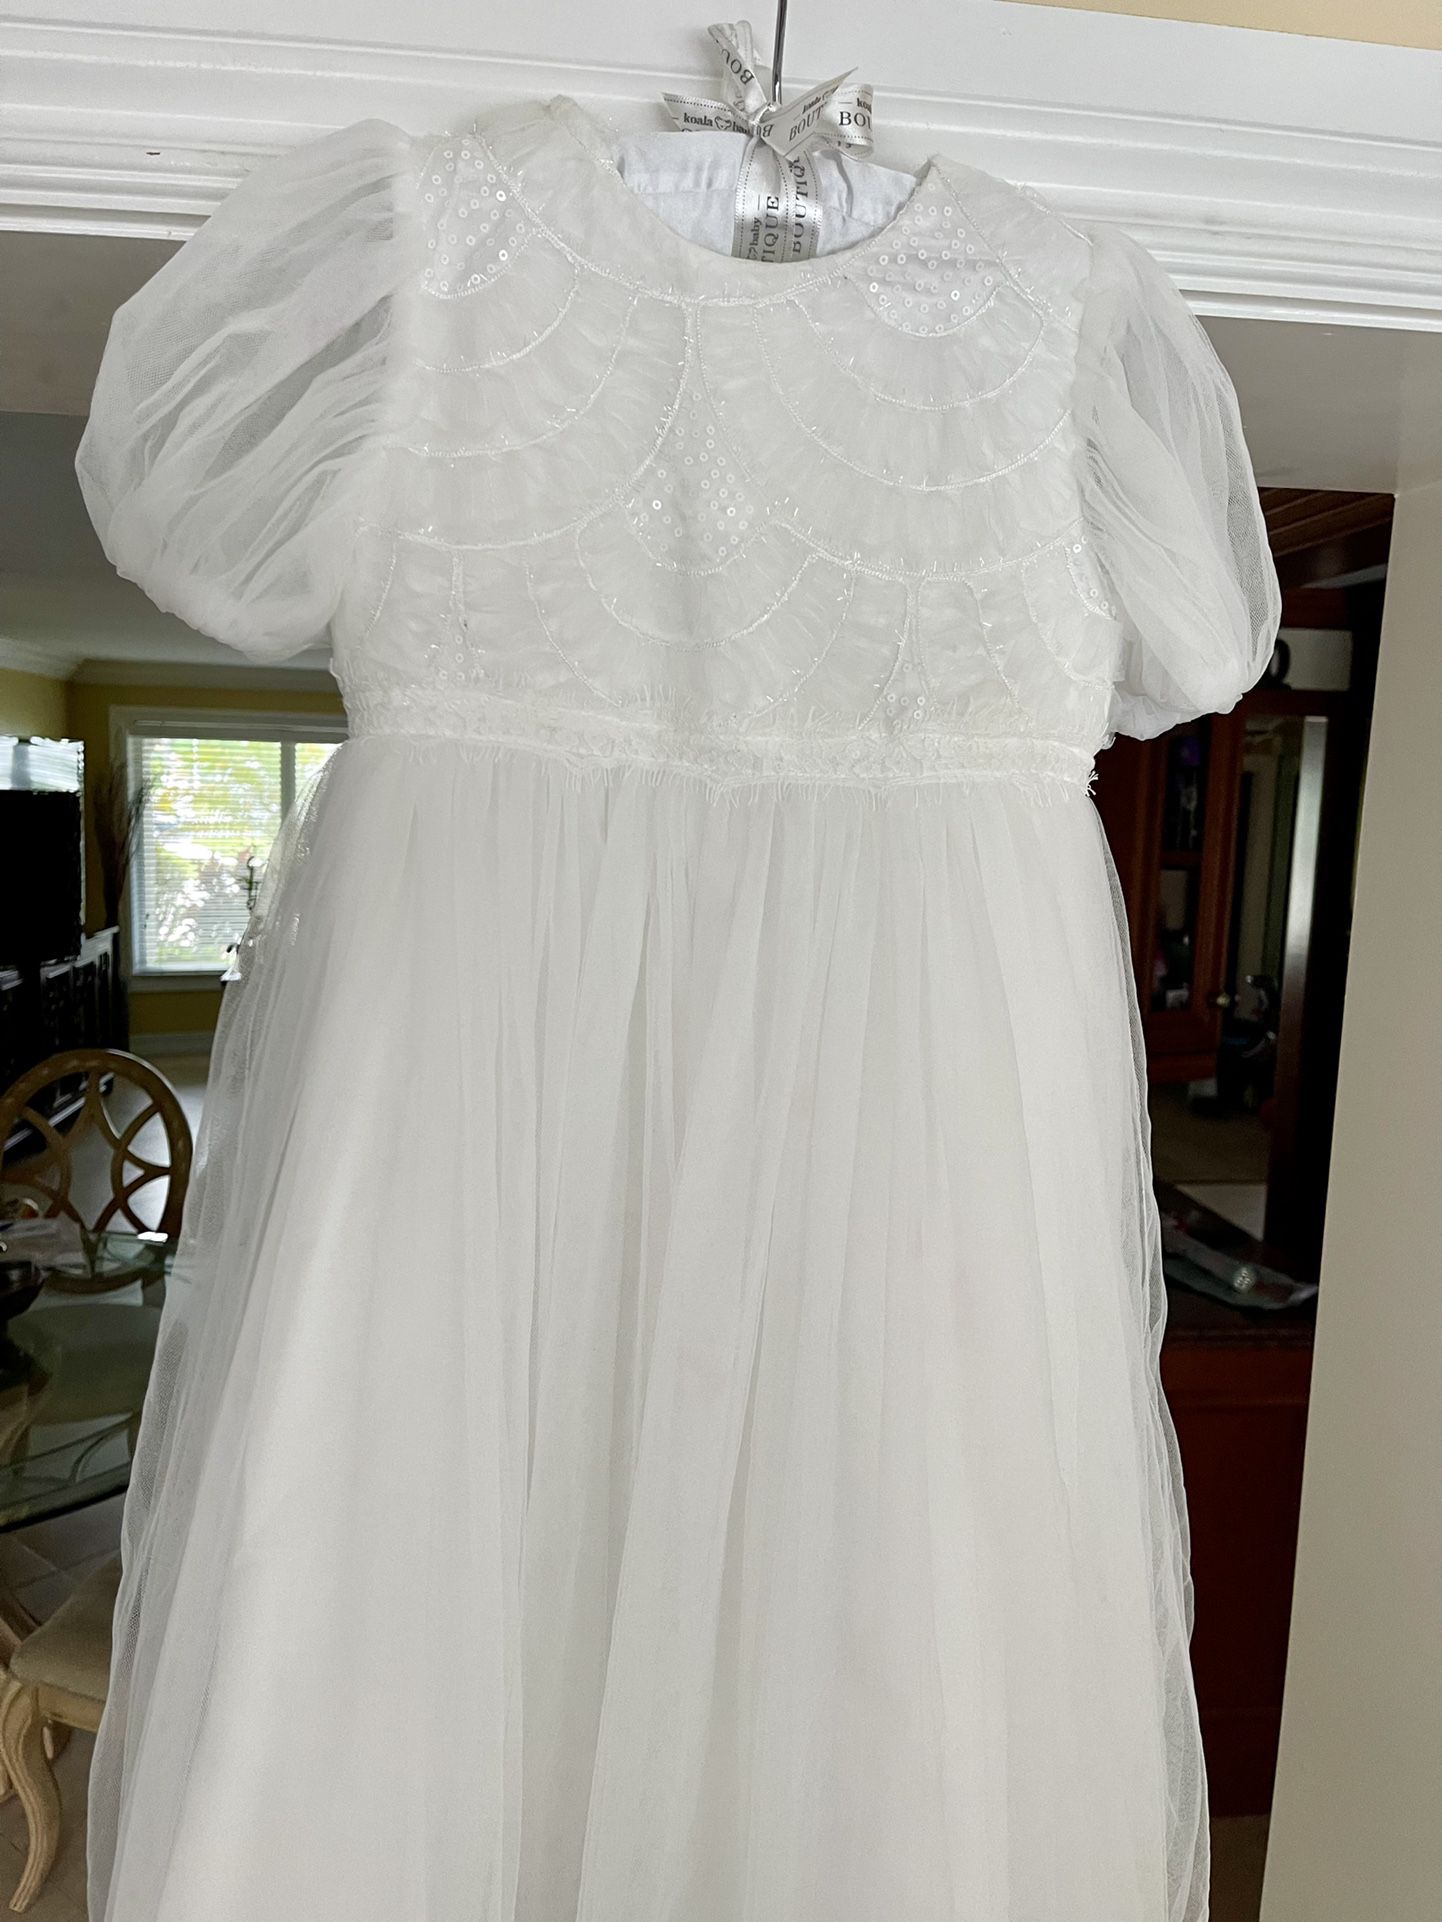 Flower Girl, Baptism, First Communion Or Any Other Special Occasion Dress!